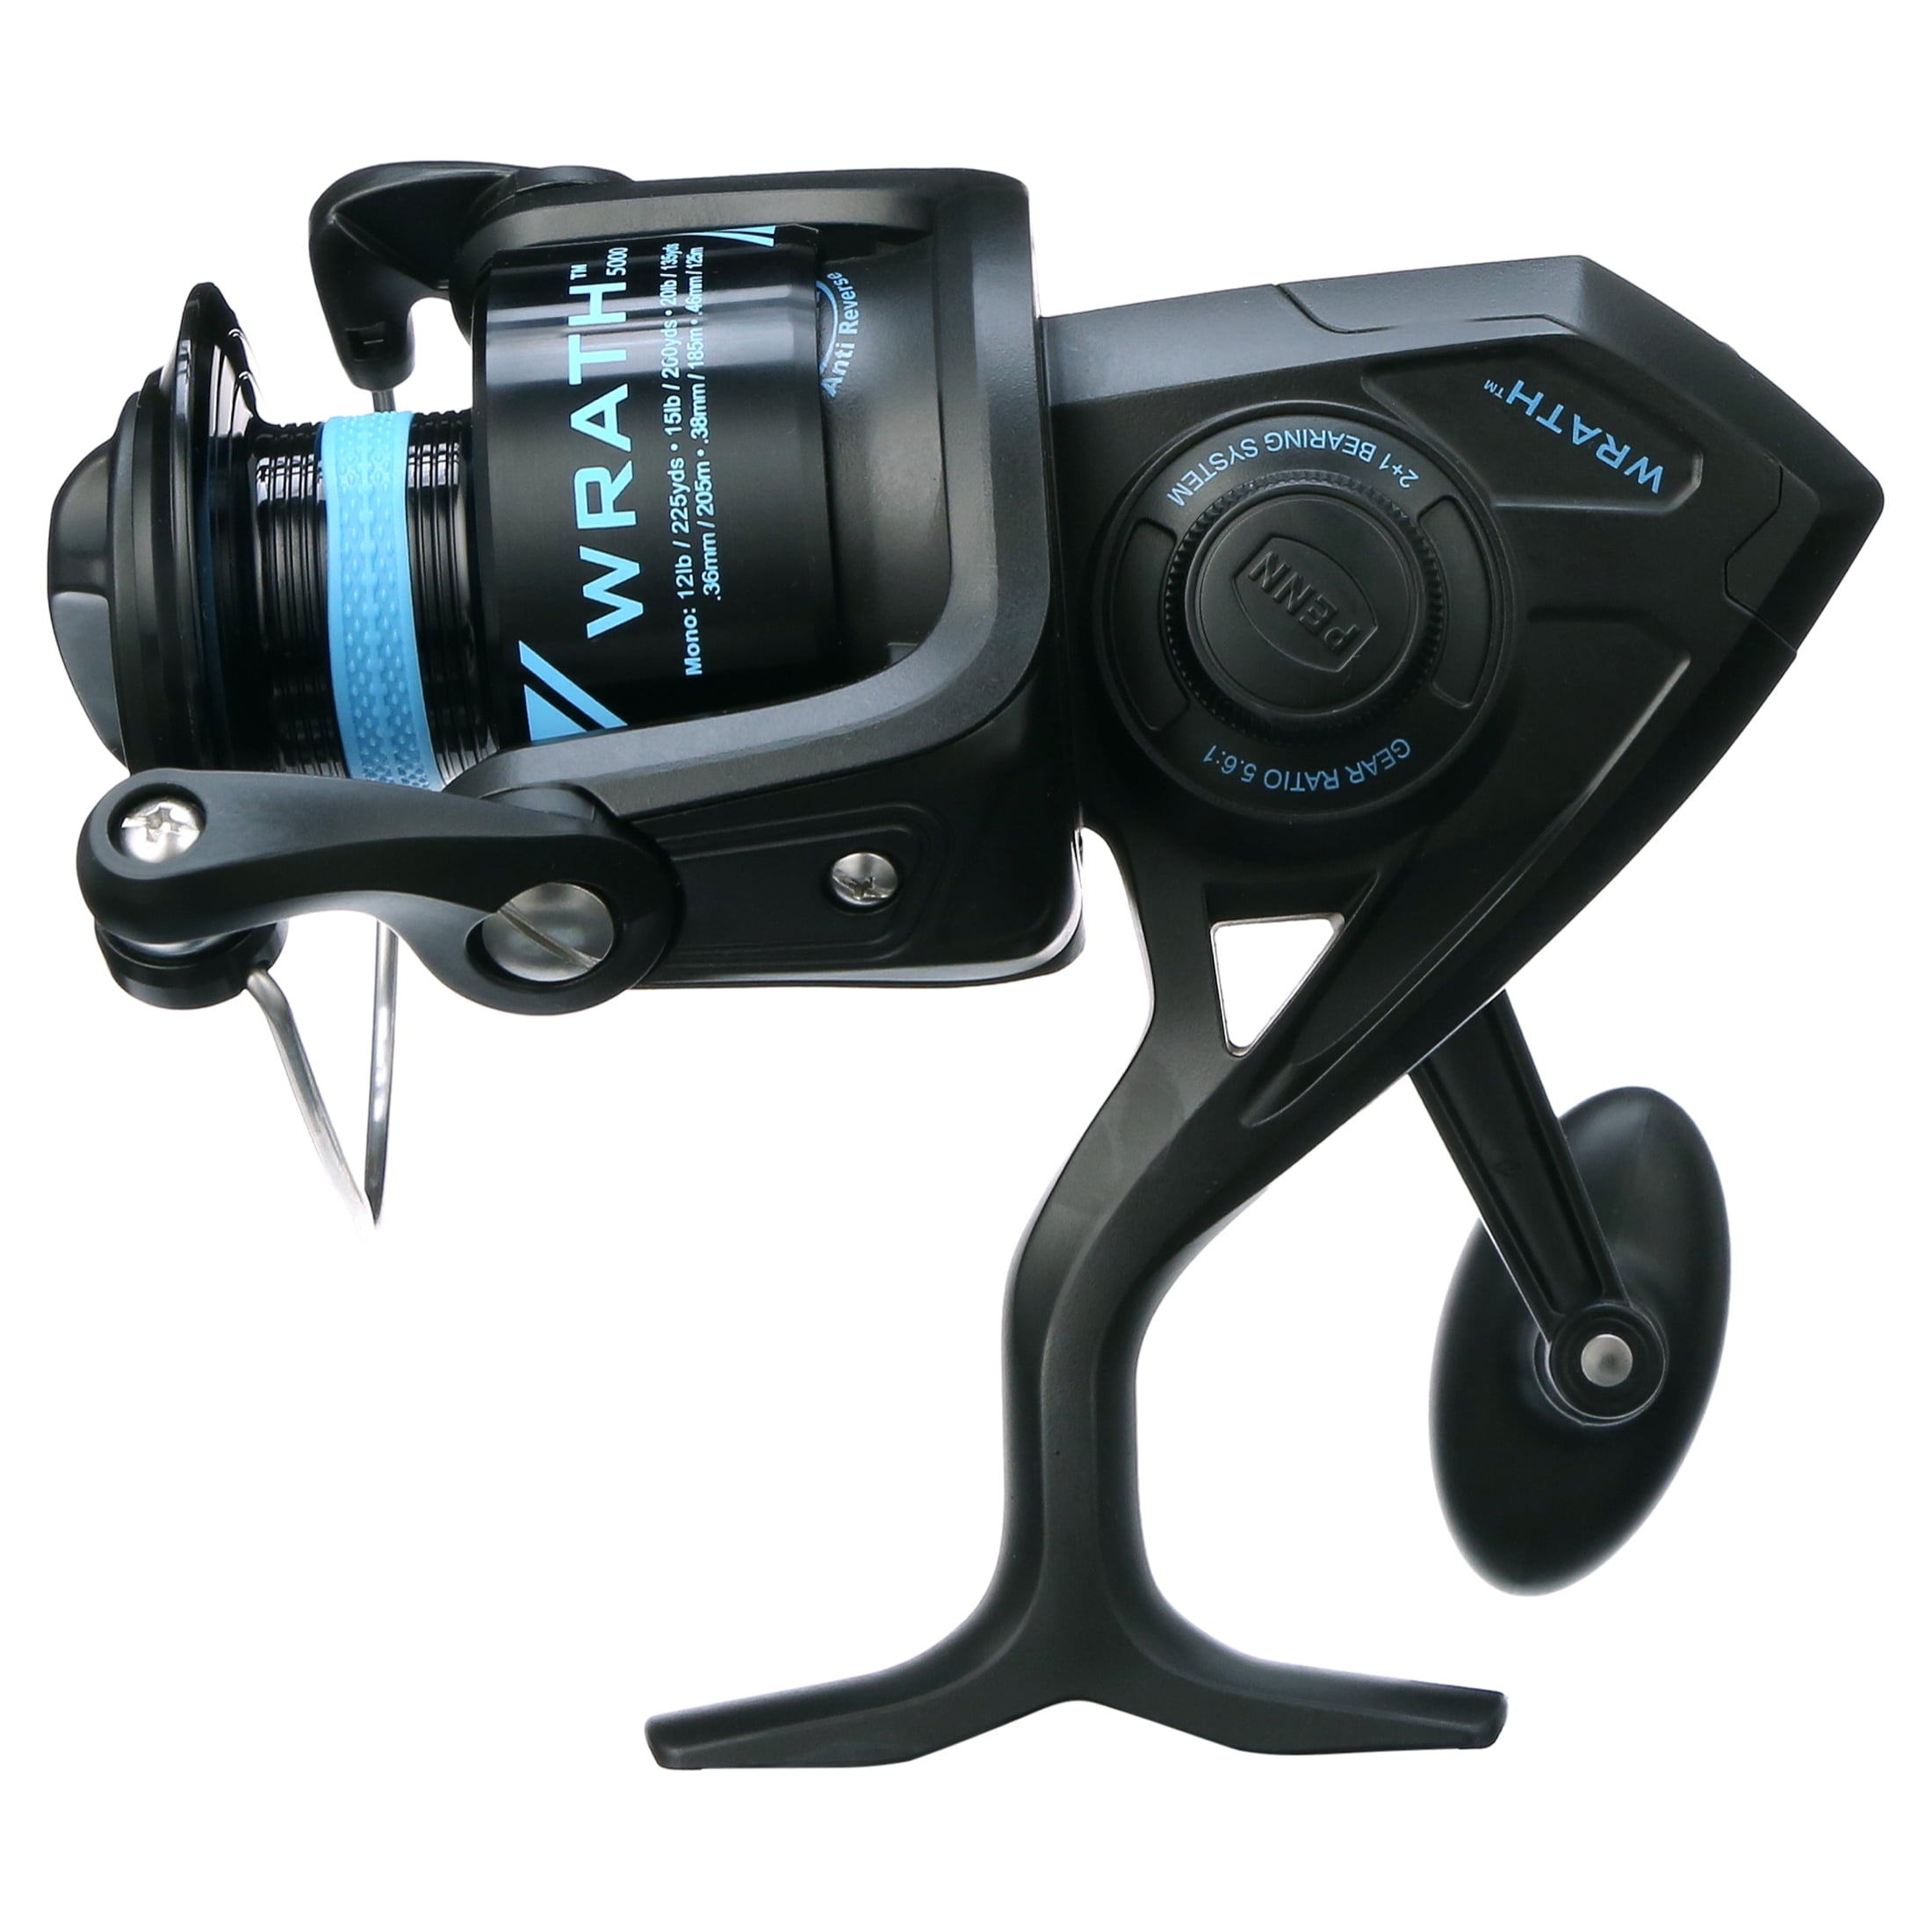  Quantum Throttle Baitcast Fishing Reel, 7 + 1 Ball Bearings  with a Smooth and Powerful 7.3:1 Gear Ratio, Zero Friction Pinion, DynaMag  Cast Control, and Oversized Non-Slip Handle Knobs : Sports & Outdoors